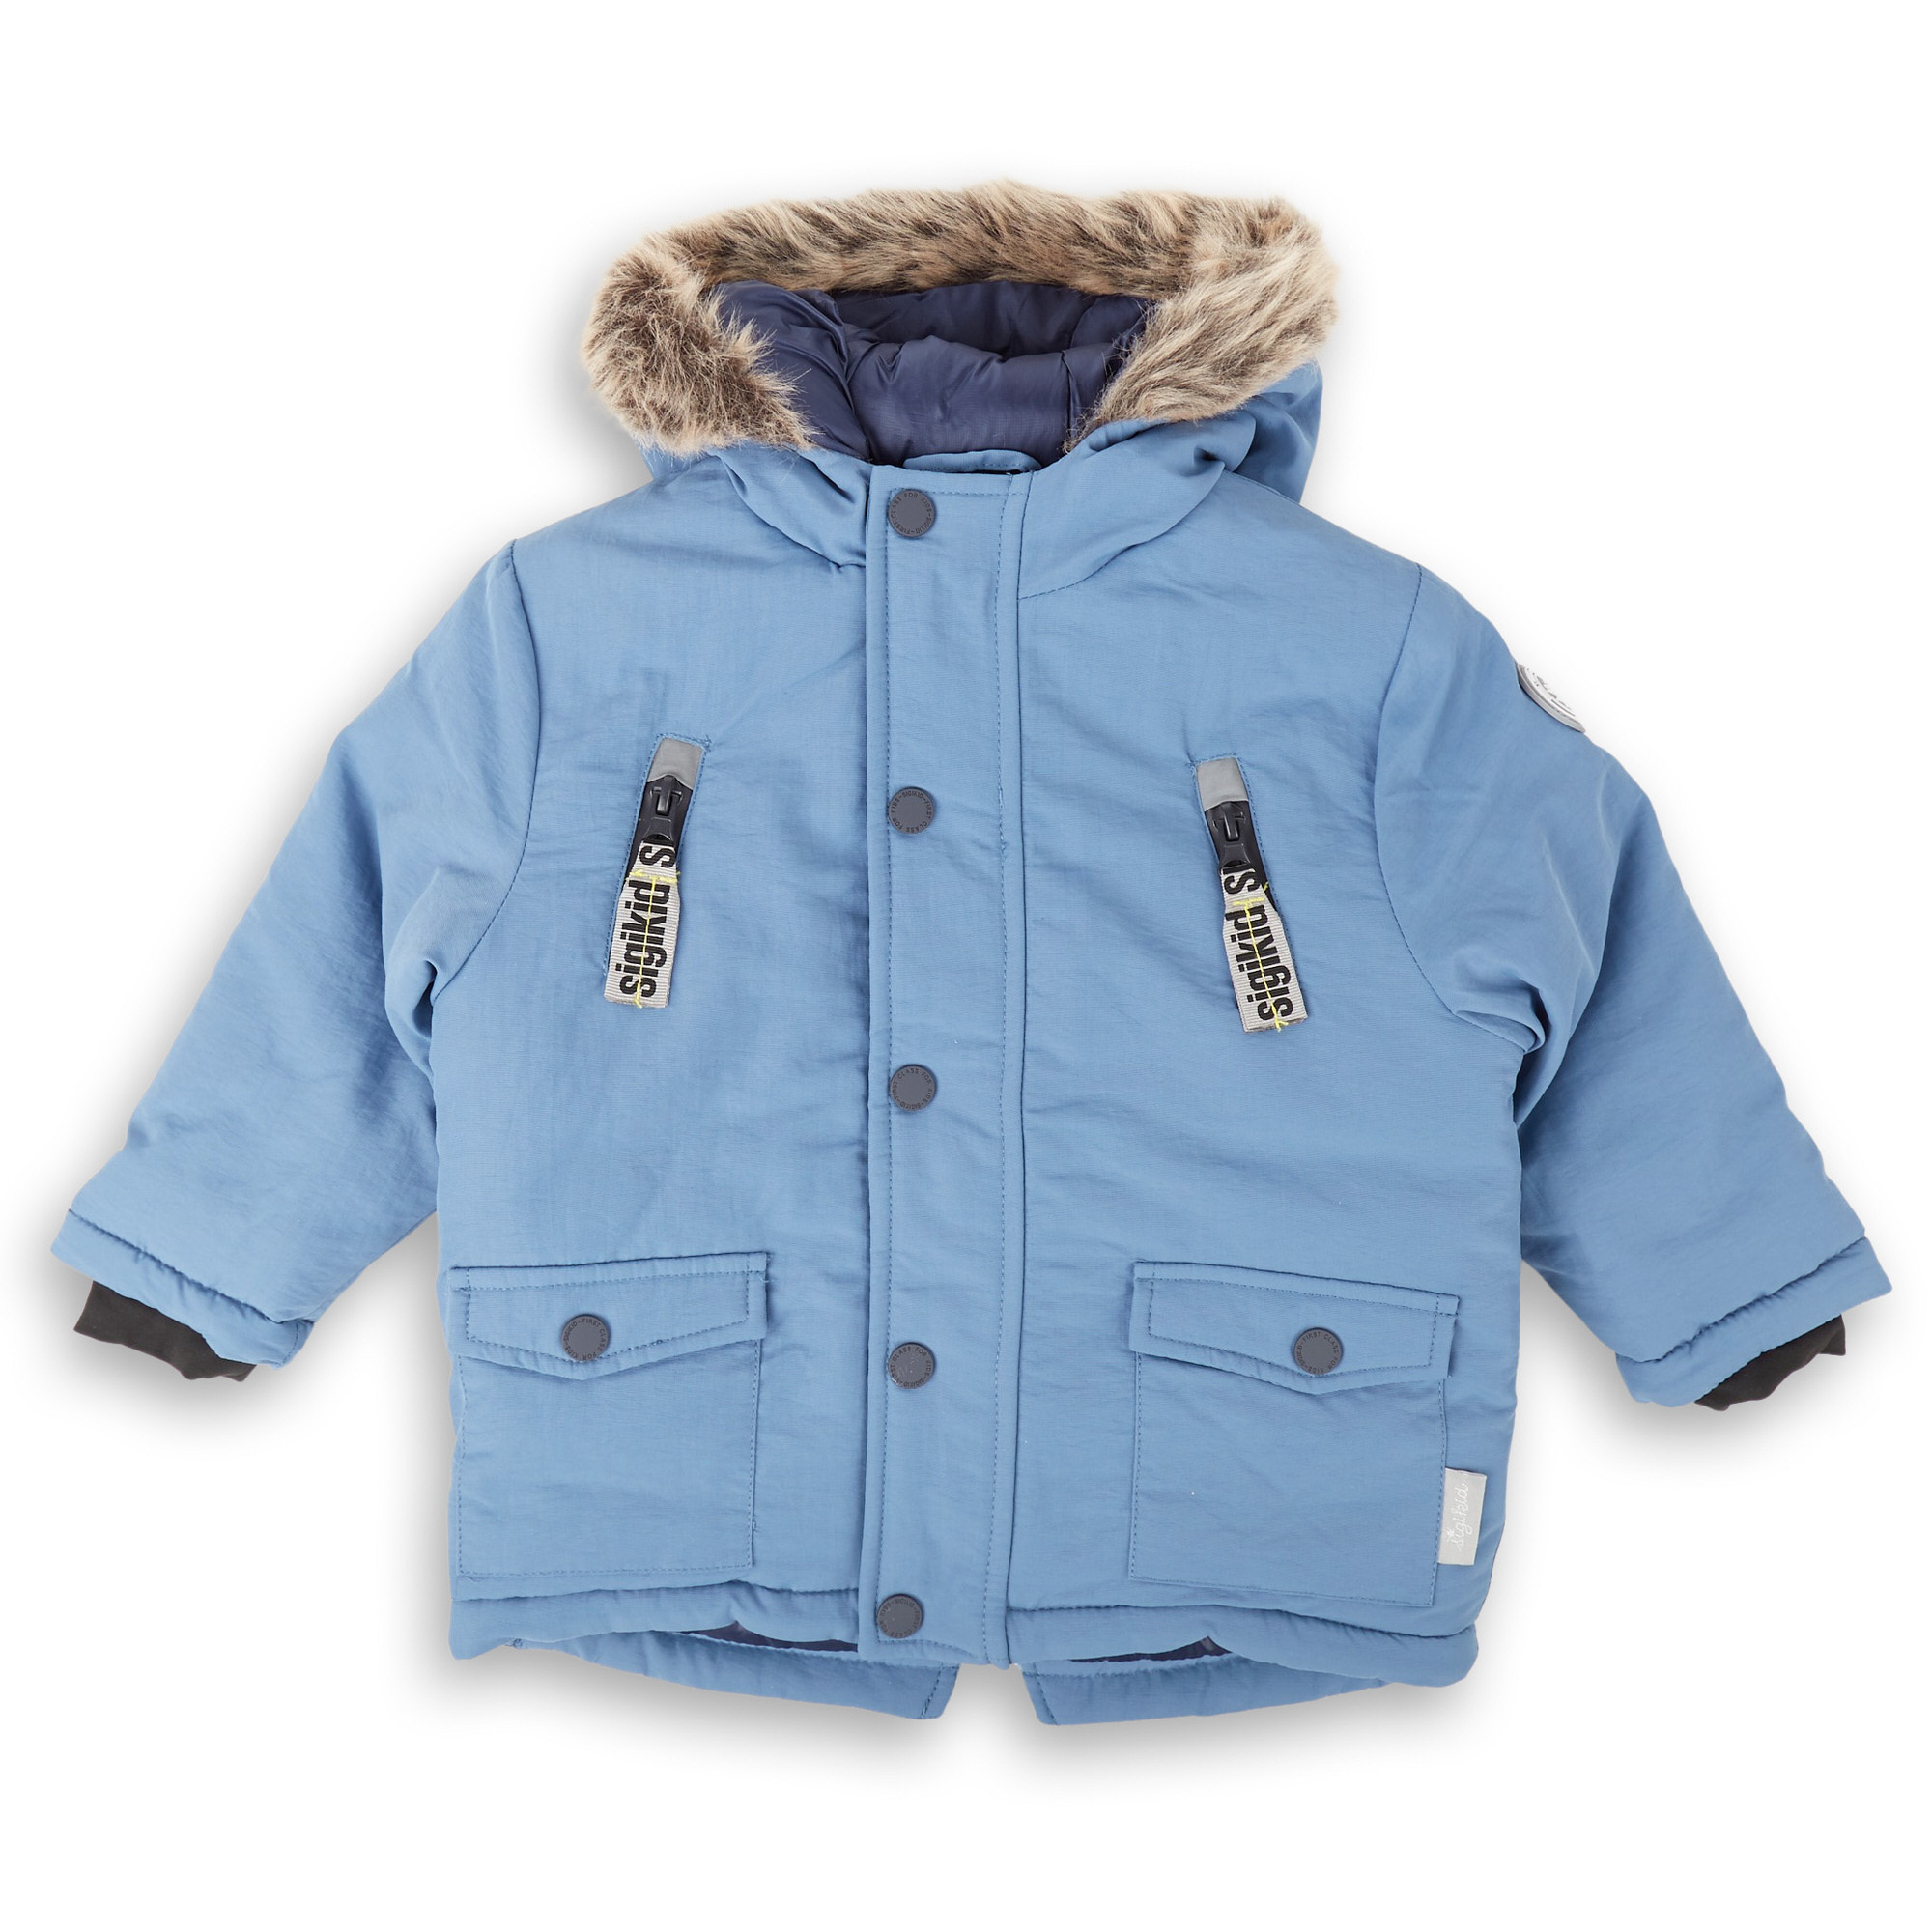 Insulated hooded winter jacket, blue, for babies and toddlers